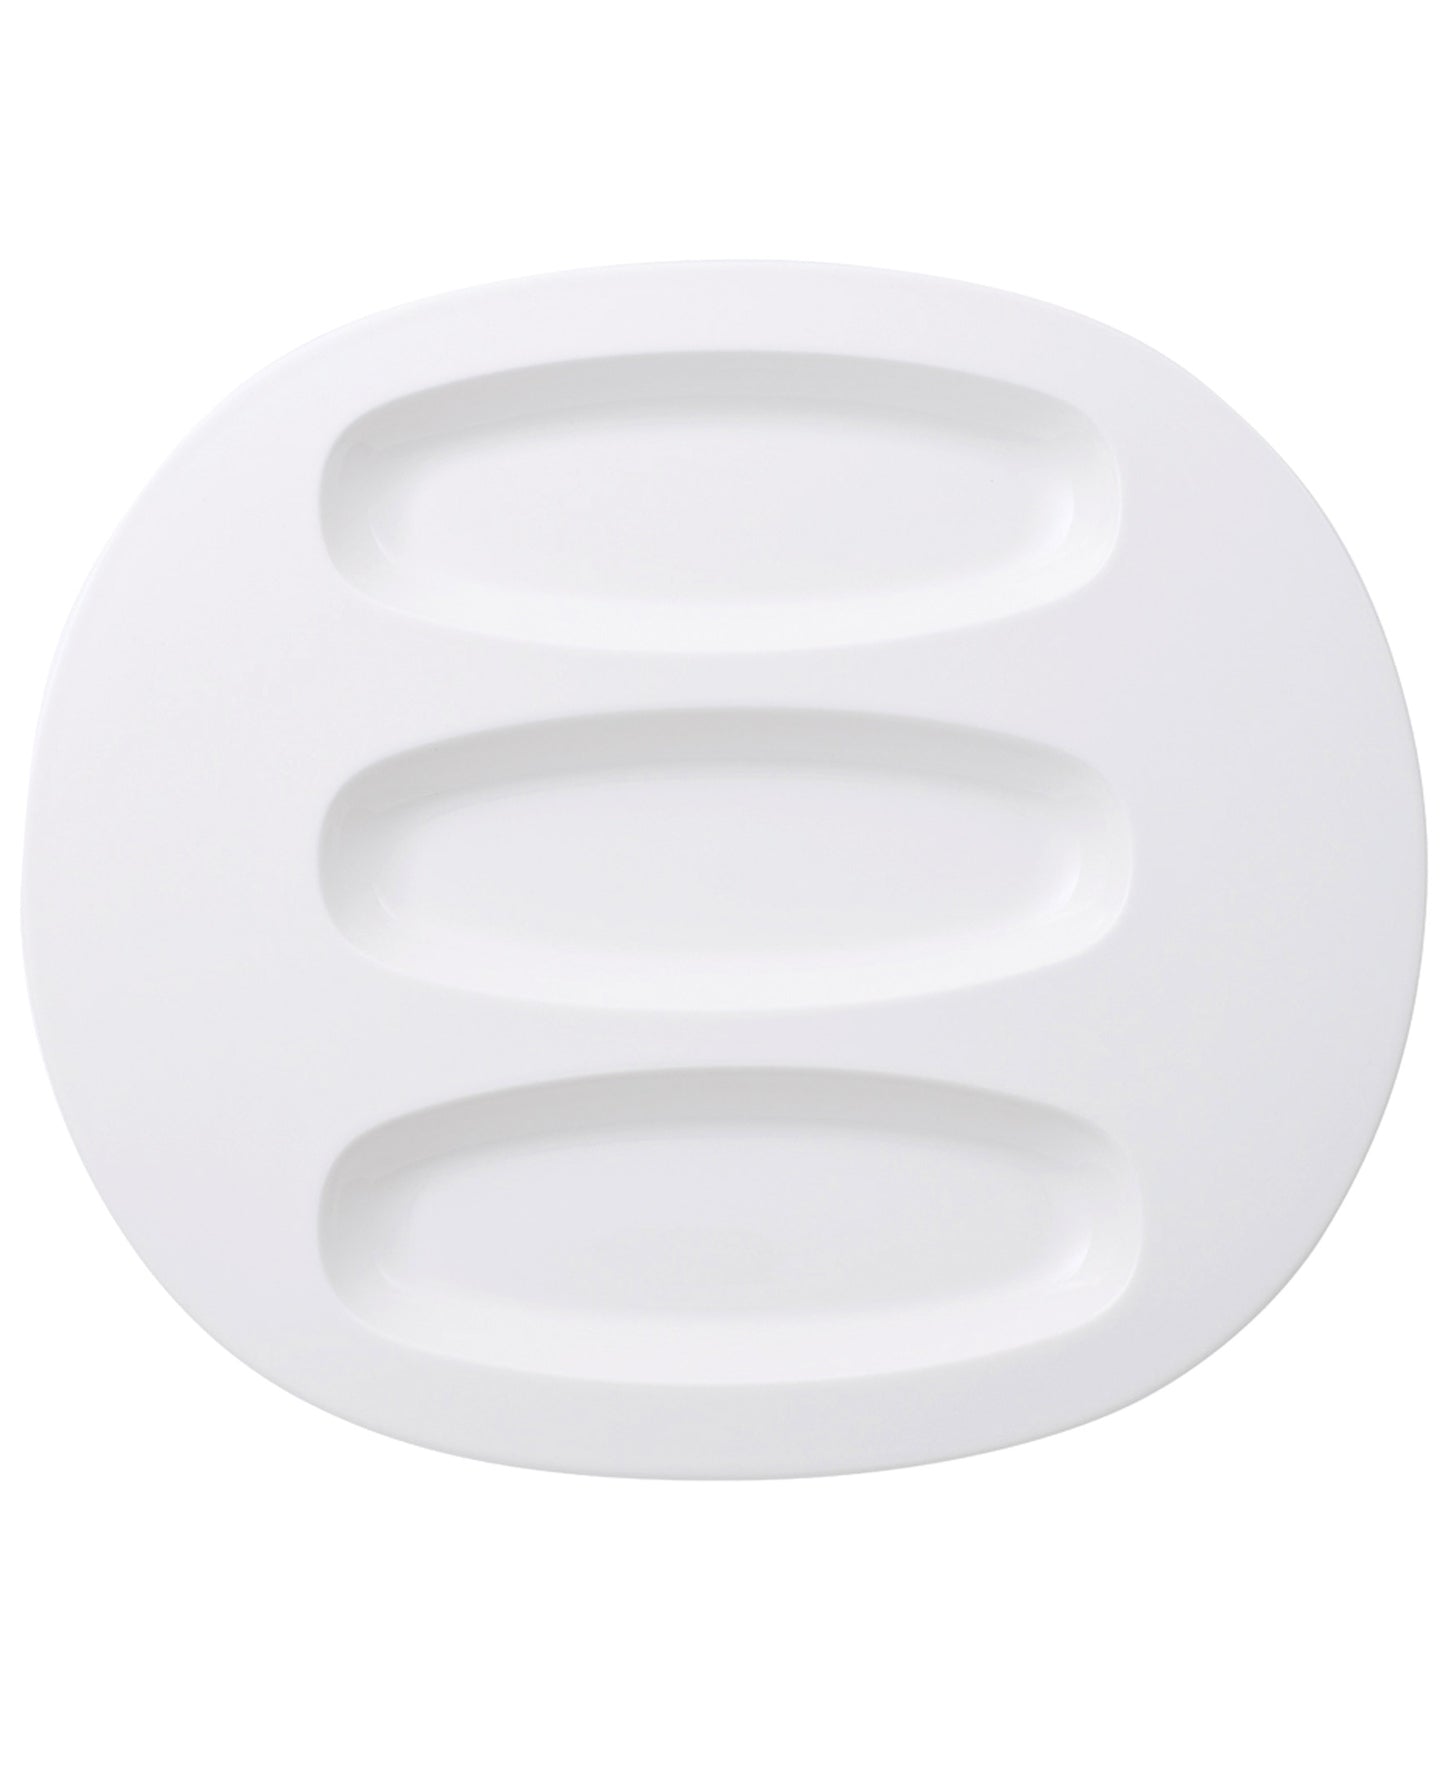 Affinity Oval Compartment Plate